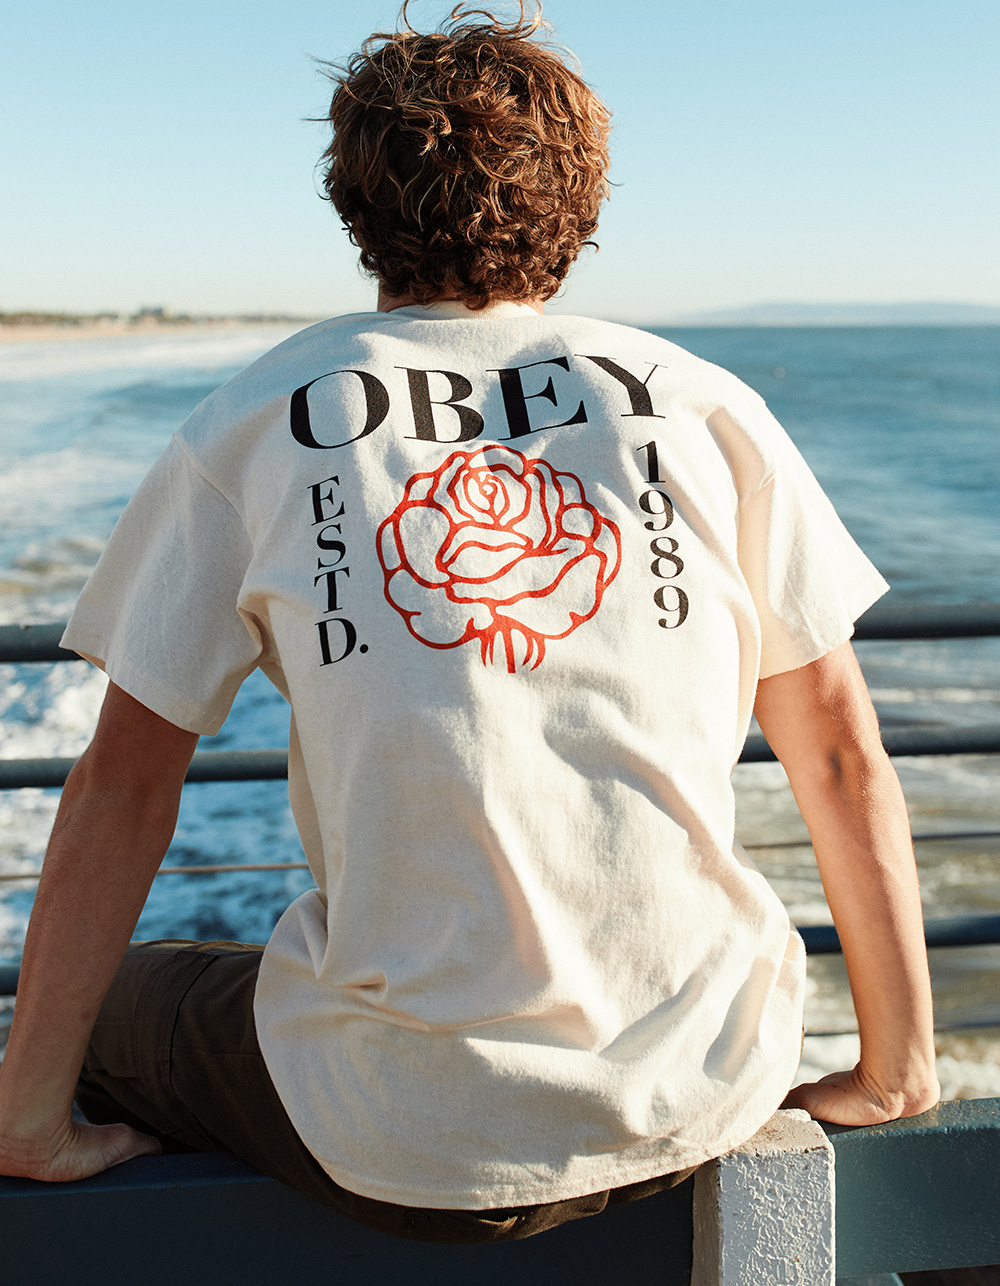 OBEY Fiore Mens Tee